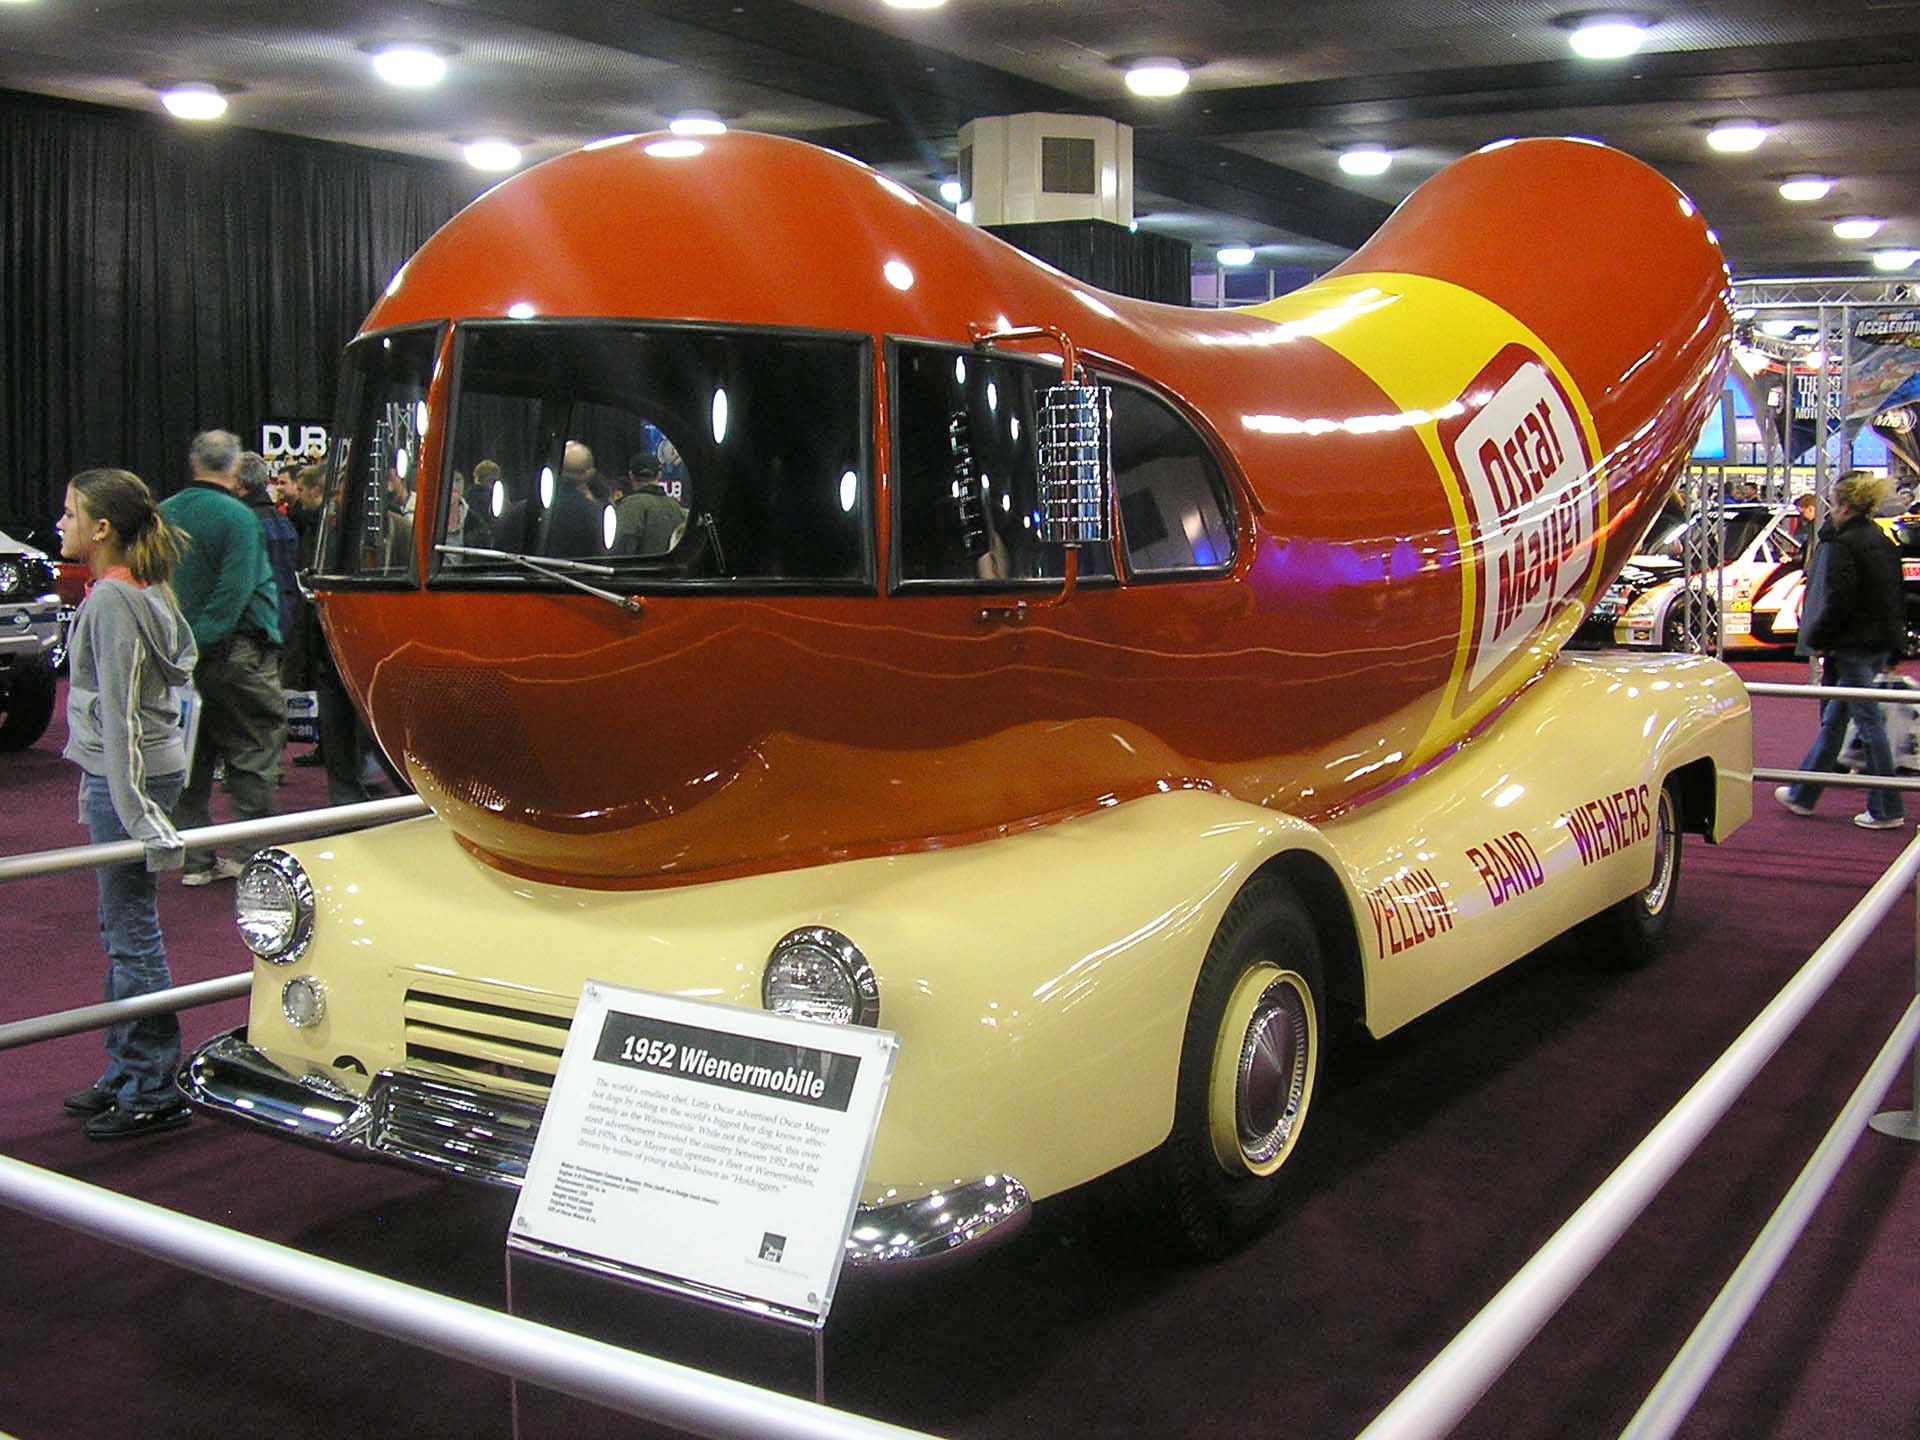 And of course, the Oscar Meyer Weinermobile. Originally created by Carl Mayer in 1936, there have been several generations since, and this one is a 1952 model usually on display at the Henry Ford Museum in Dearborn, Michigan. The Wienermobile criss-crosses North America promoting Oscar Mayer products, their hot dogs chief among them, and whose adventures you can follow on Instagram.